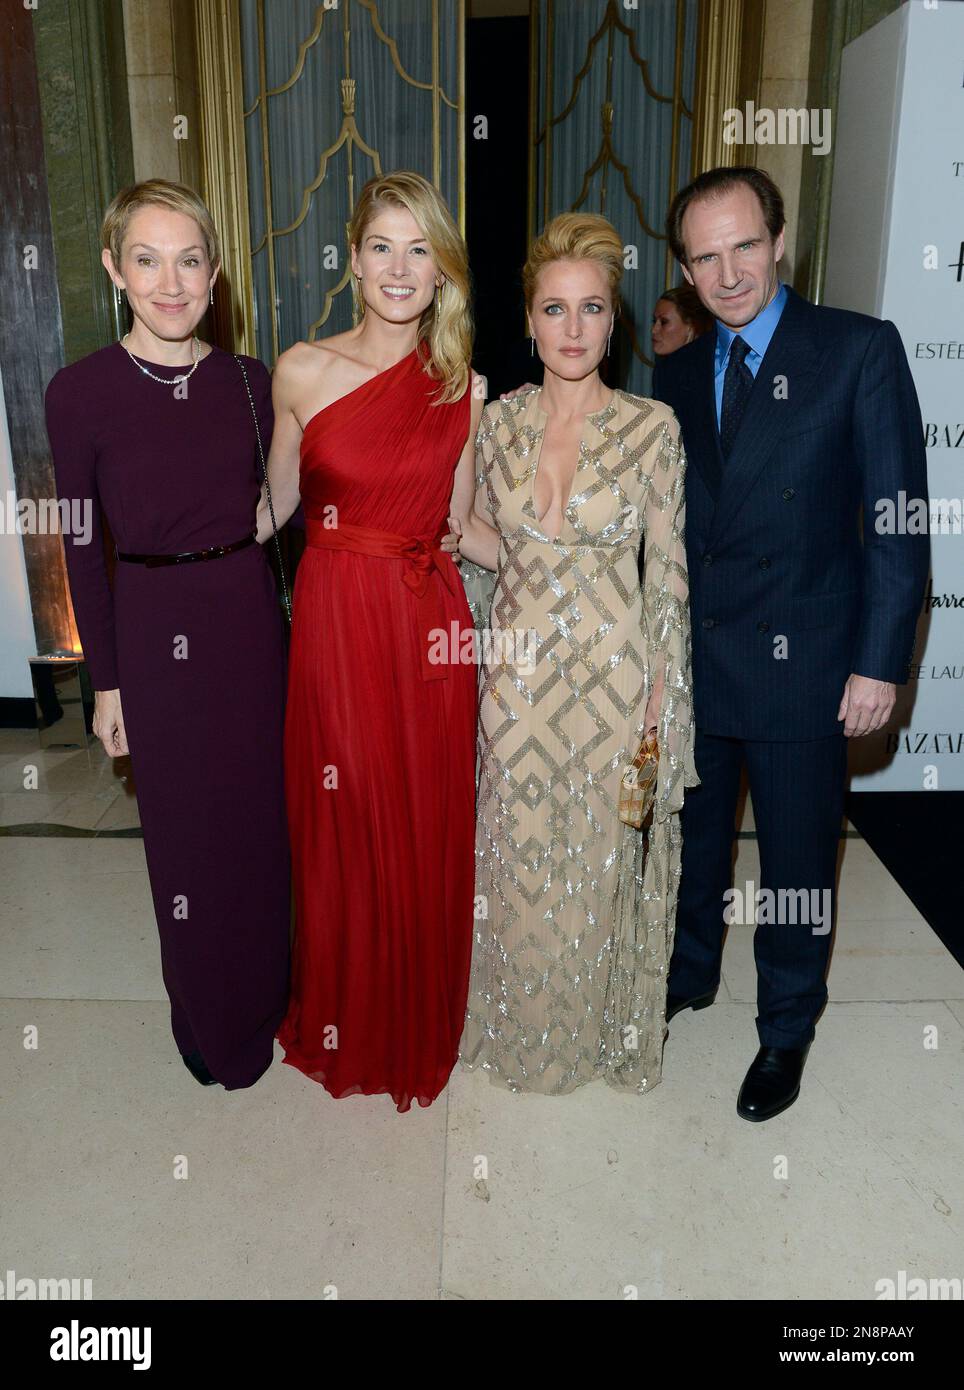 From left, Justine Picardie, Rosamund Pike, Gillian Anderson and Ralph  Fiennes are seen at the Harper's Bazaar Woman of the Year Awards 2012 in  association with Estée Lauder, Harrods and Tiffany 